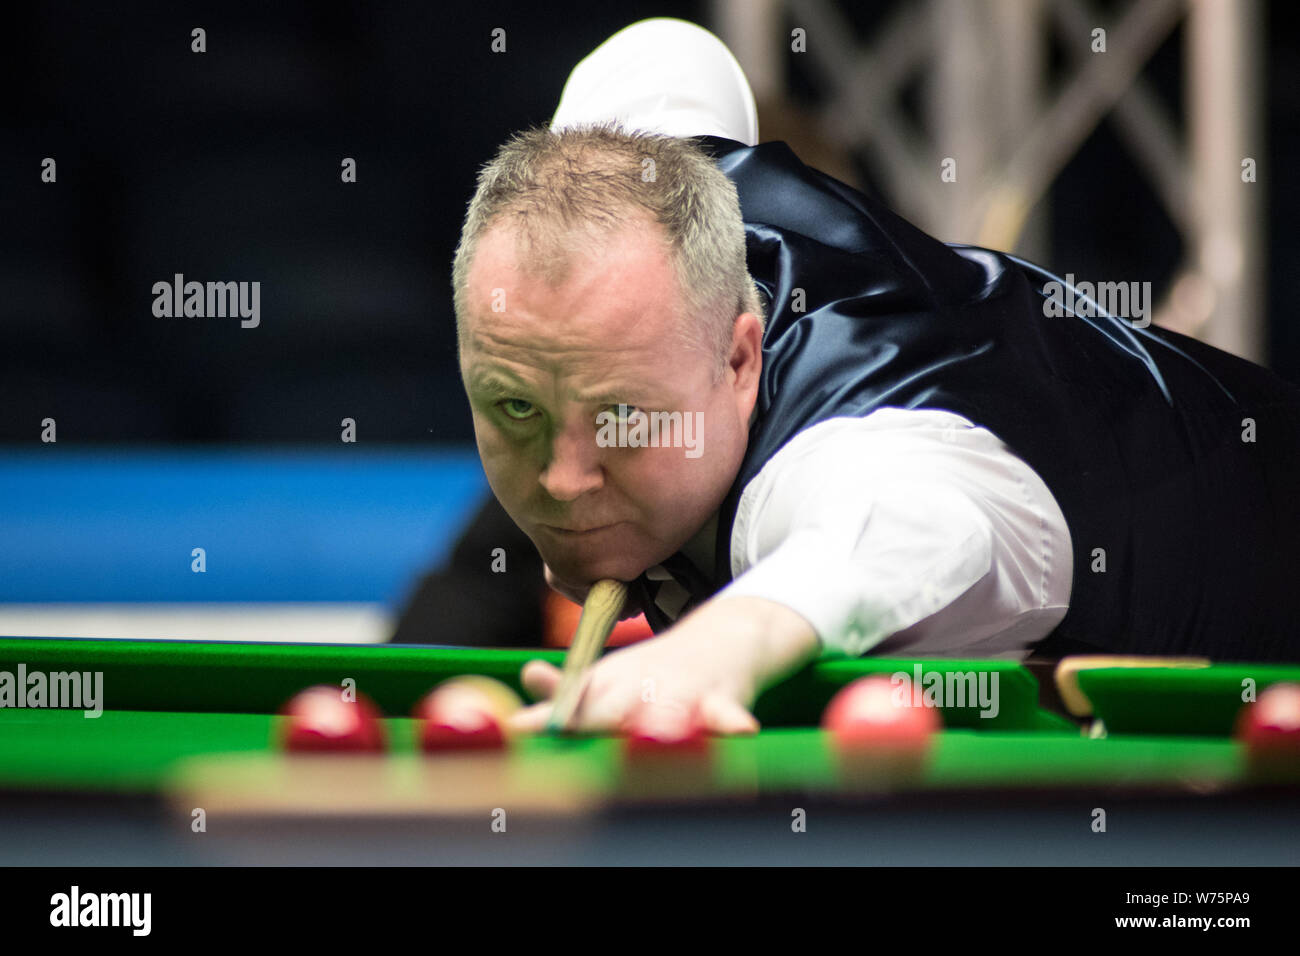 John Higgins of Scotland plays a shot to Jack Lisowski of England in their first round match during the 2017 Dafabet Scottish Open snooker tournament Stock Photo